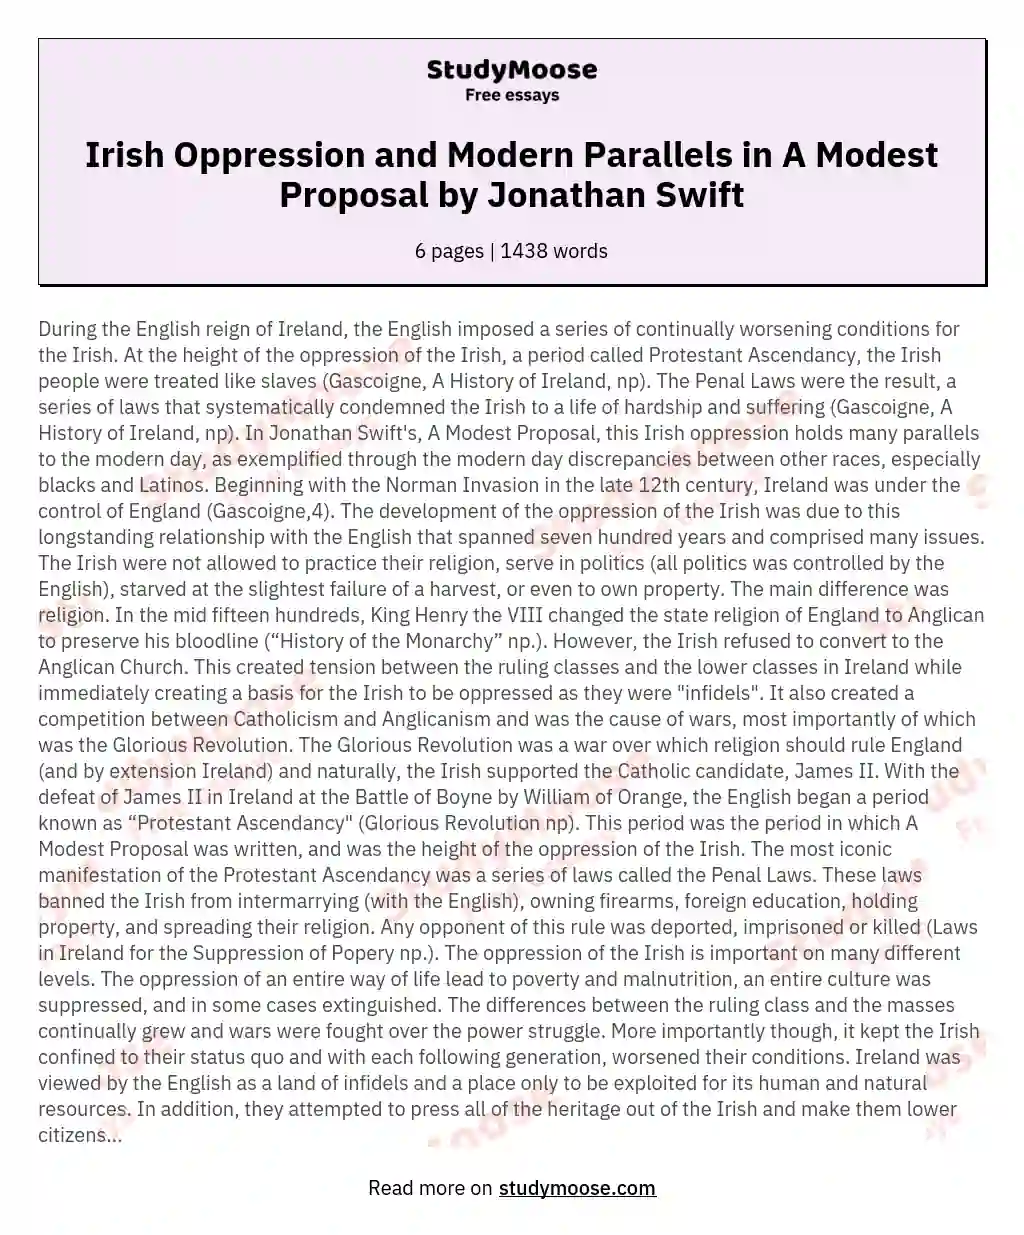 Irish Oppression and Modern Parallels in A Modest Proposal by Jonathan Swift essay